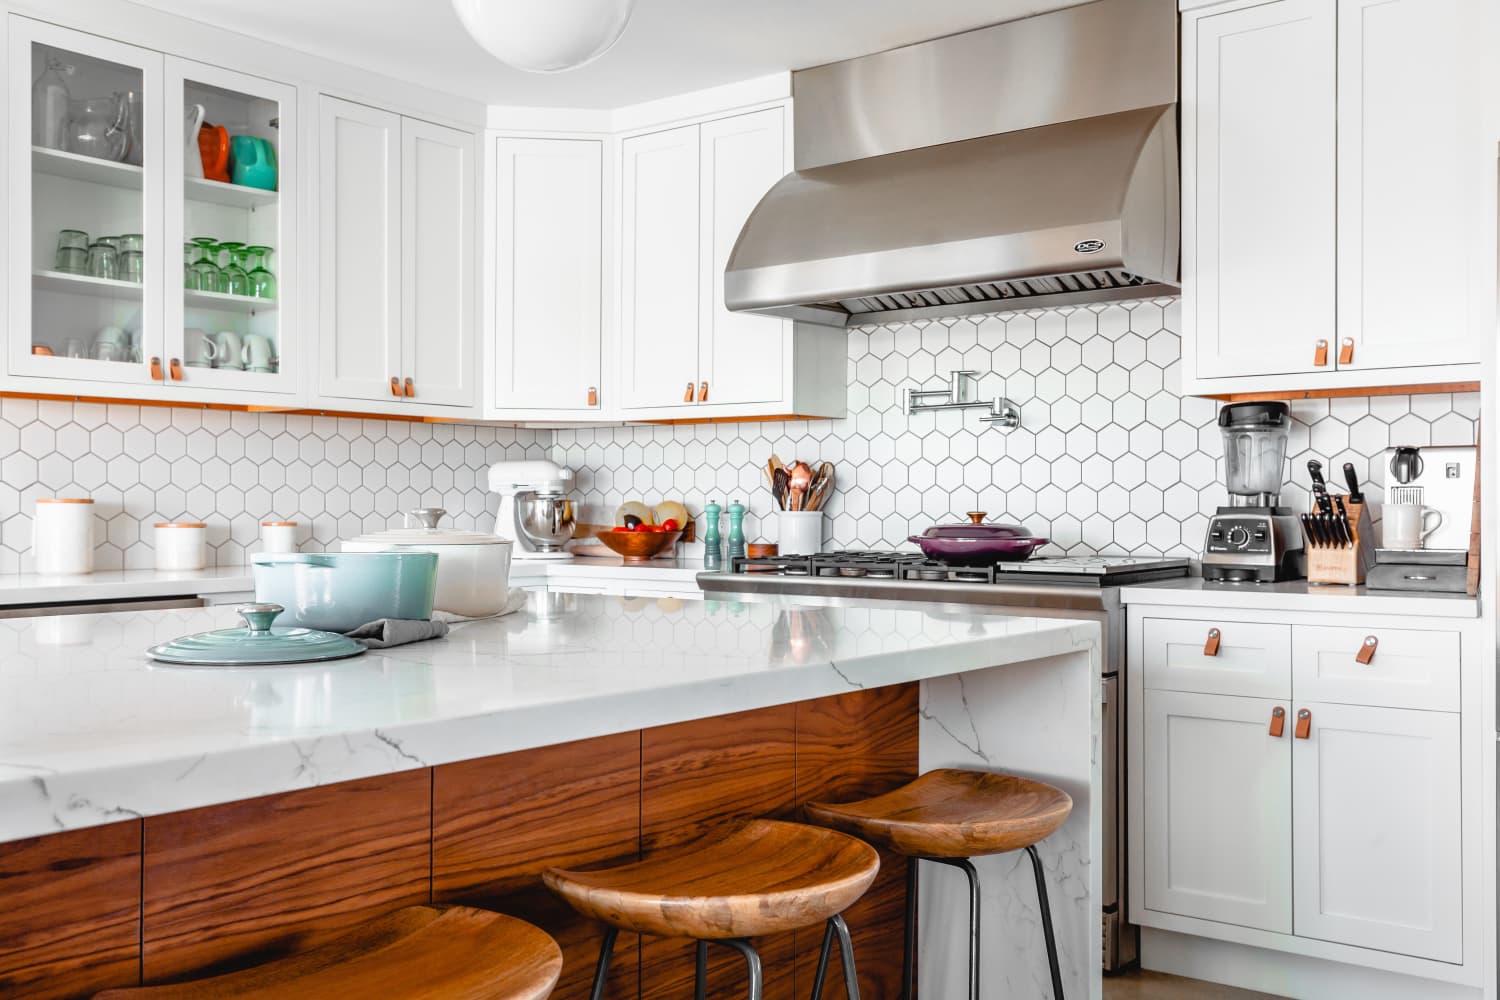 Kitchen Counter Organization: 8 Pretty Ways to Keep Your Counters Clear